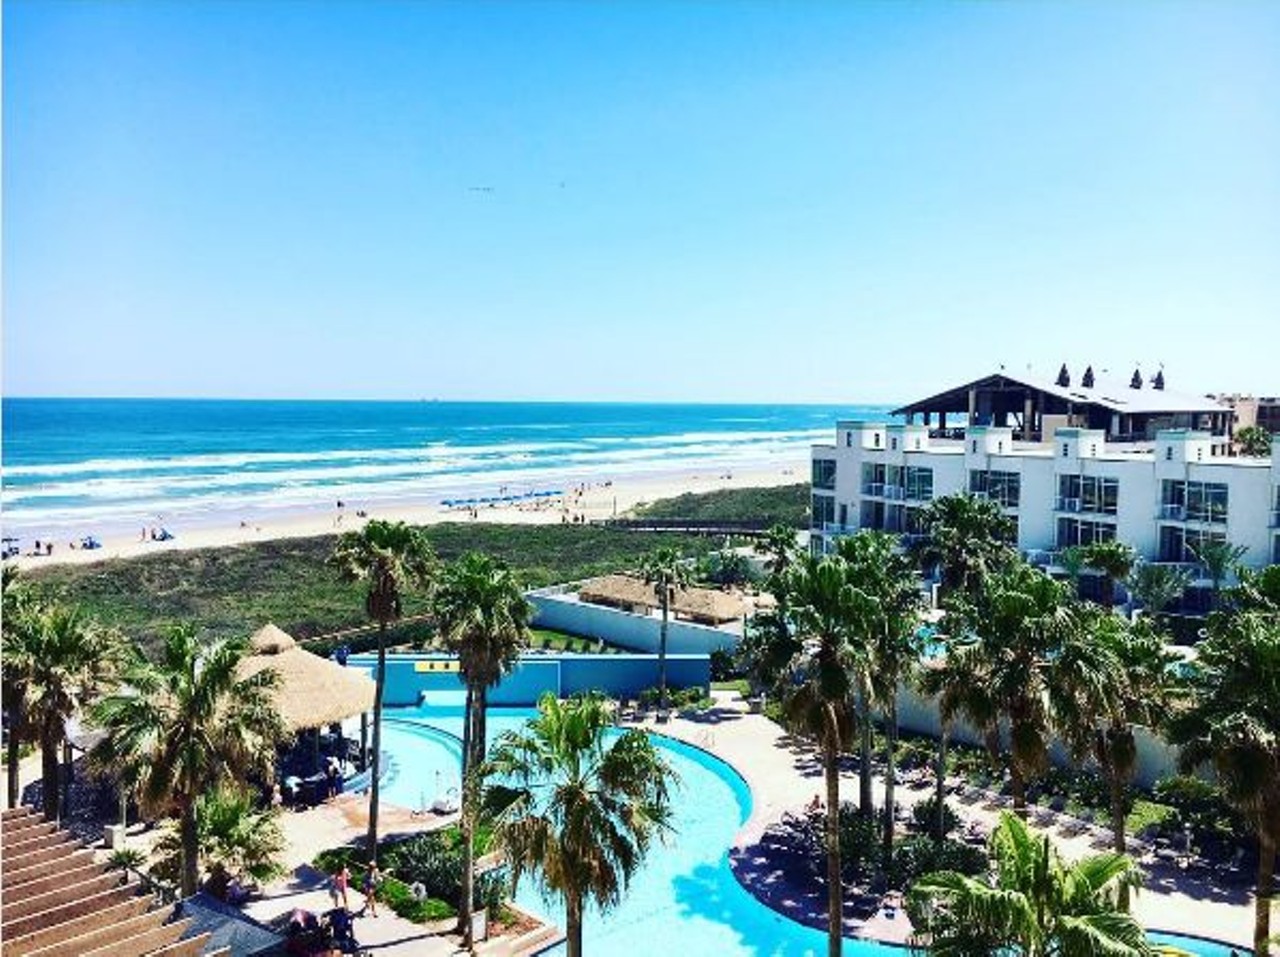 The Pearl South Padre Hotel
If a barn and the Hill Country don&#146;t work with your wedding aesthetic, the Pearl South Padre Hotel gives a few oceanside options.
310 Padre Blvd, South Padre Island, pearlsouthpadre.com
Photo via Instagram, christiinayo